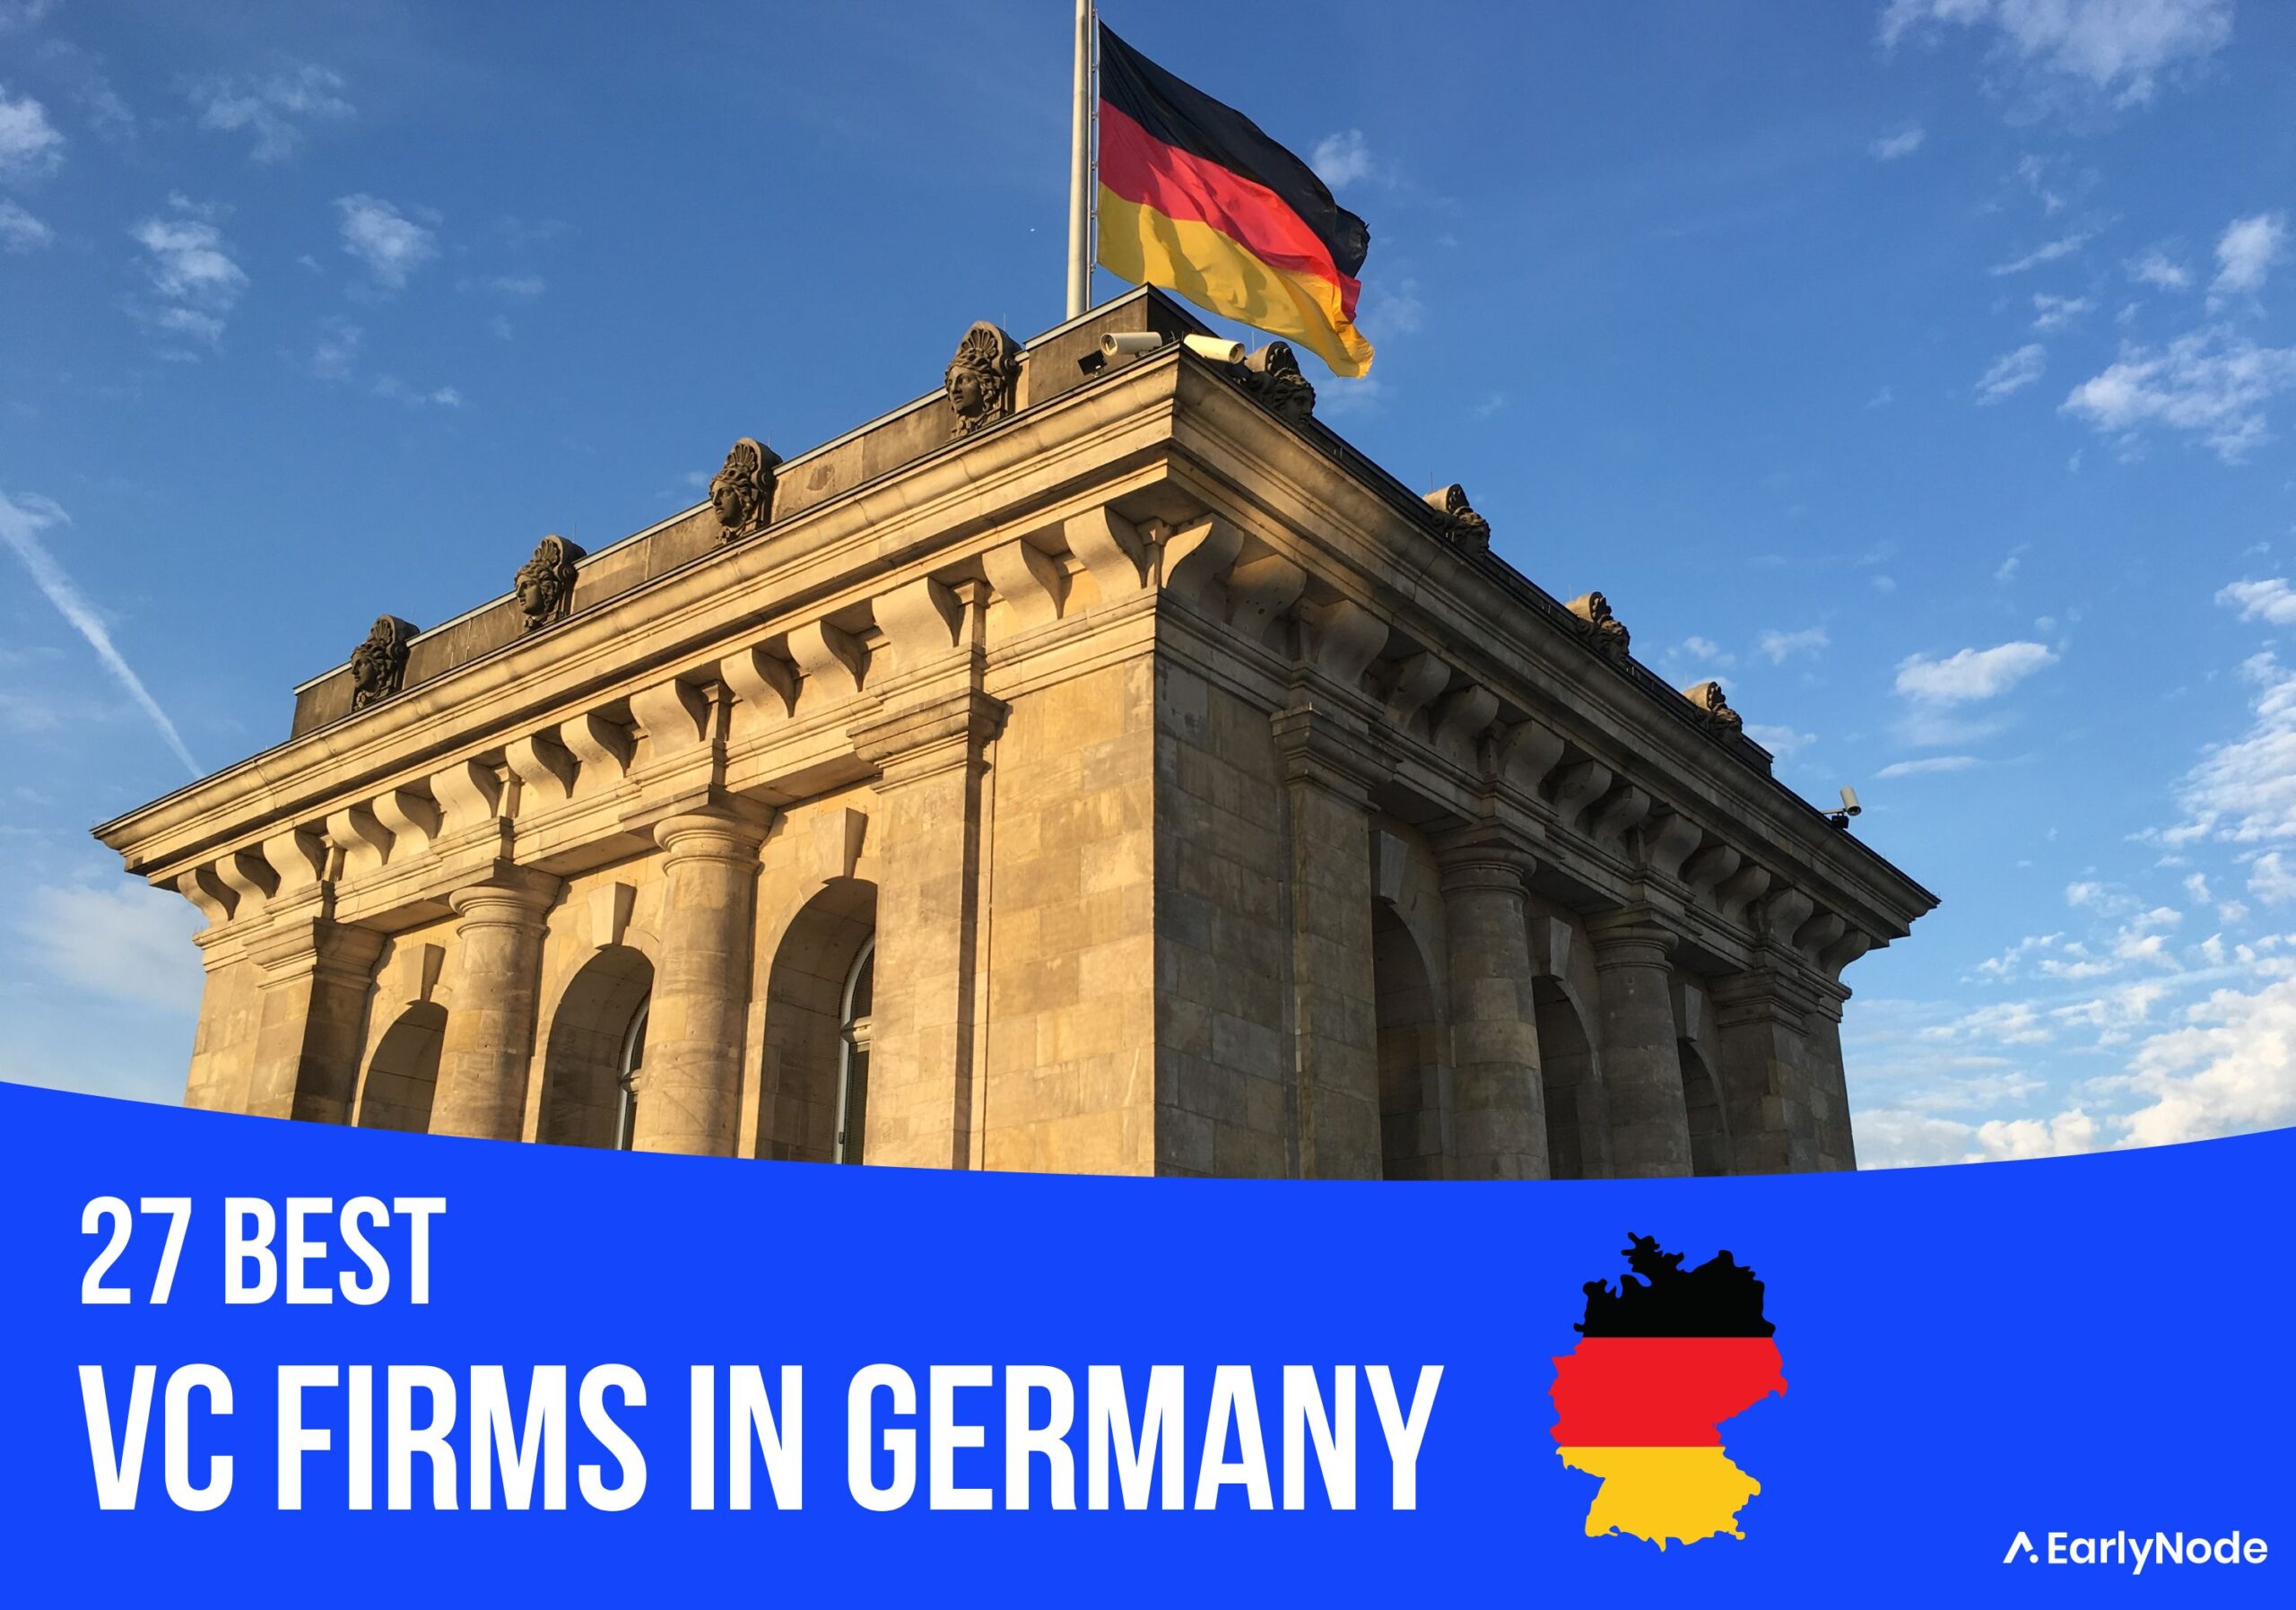 27 Best Venture Capital (VC) Firms in Germany